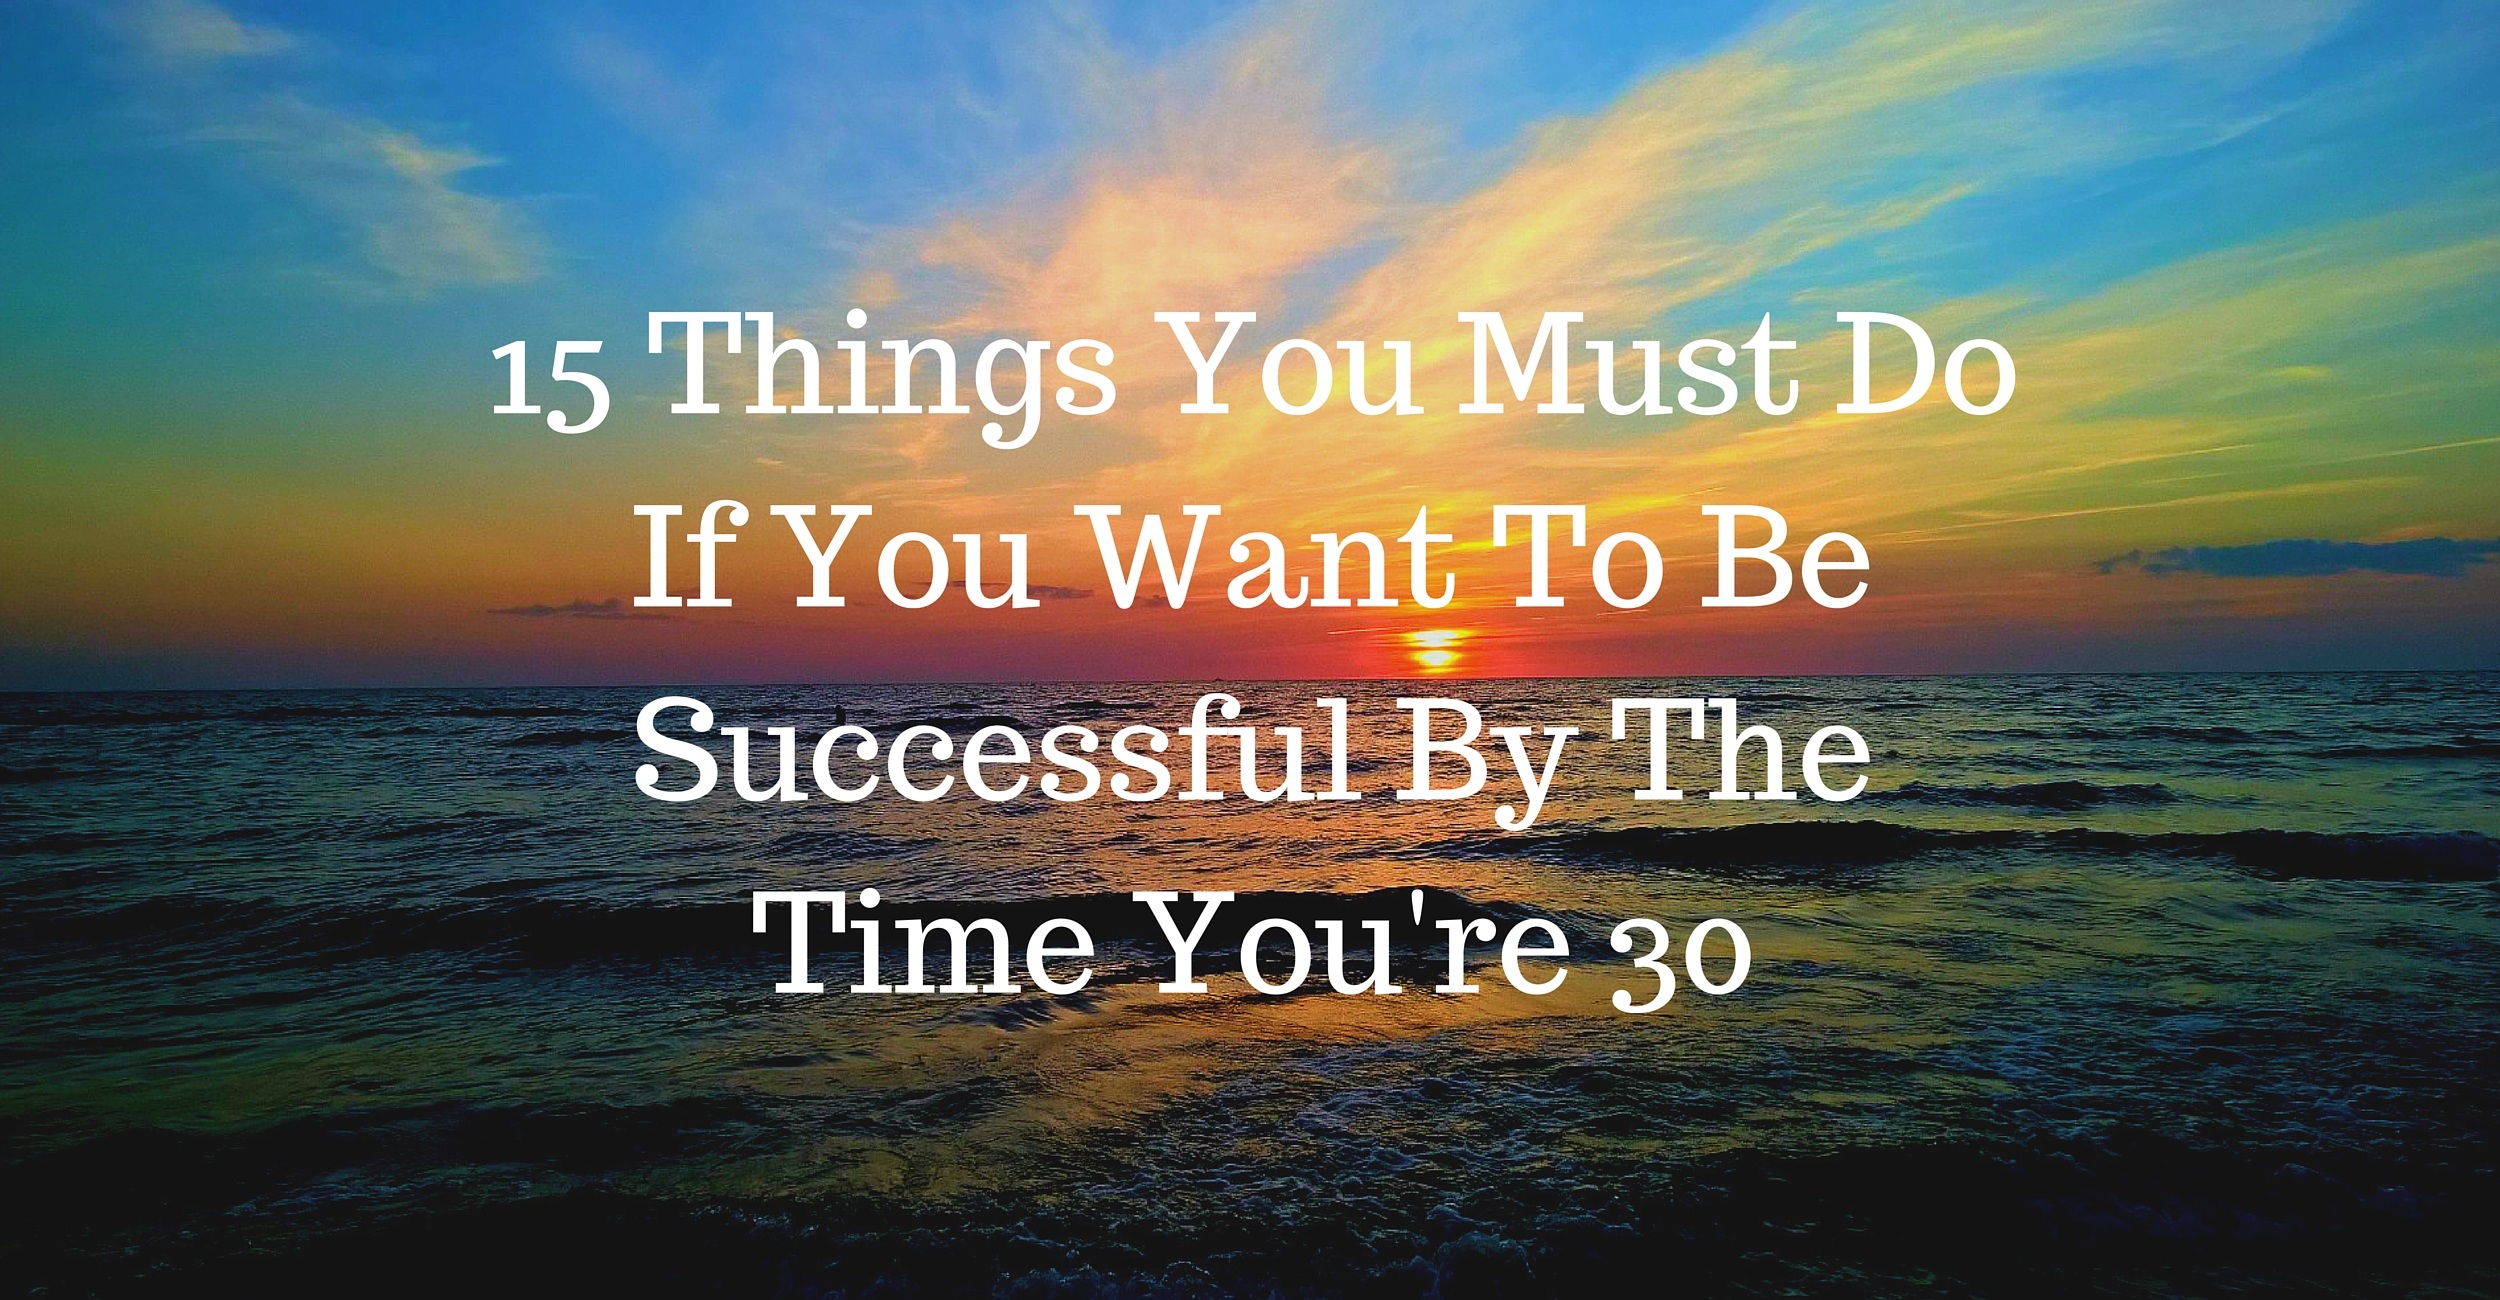 15 Things You Must Do If You Want To Be Successful By The Time You’re 30